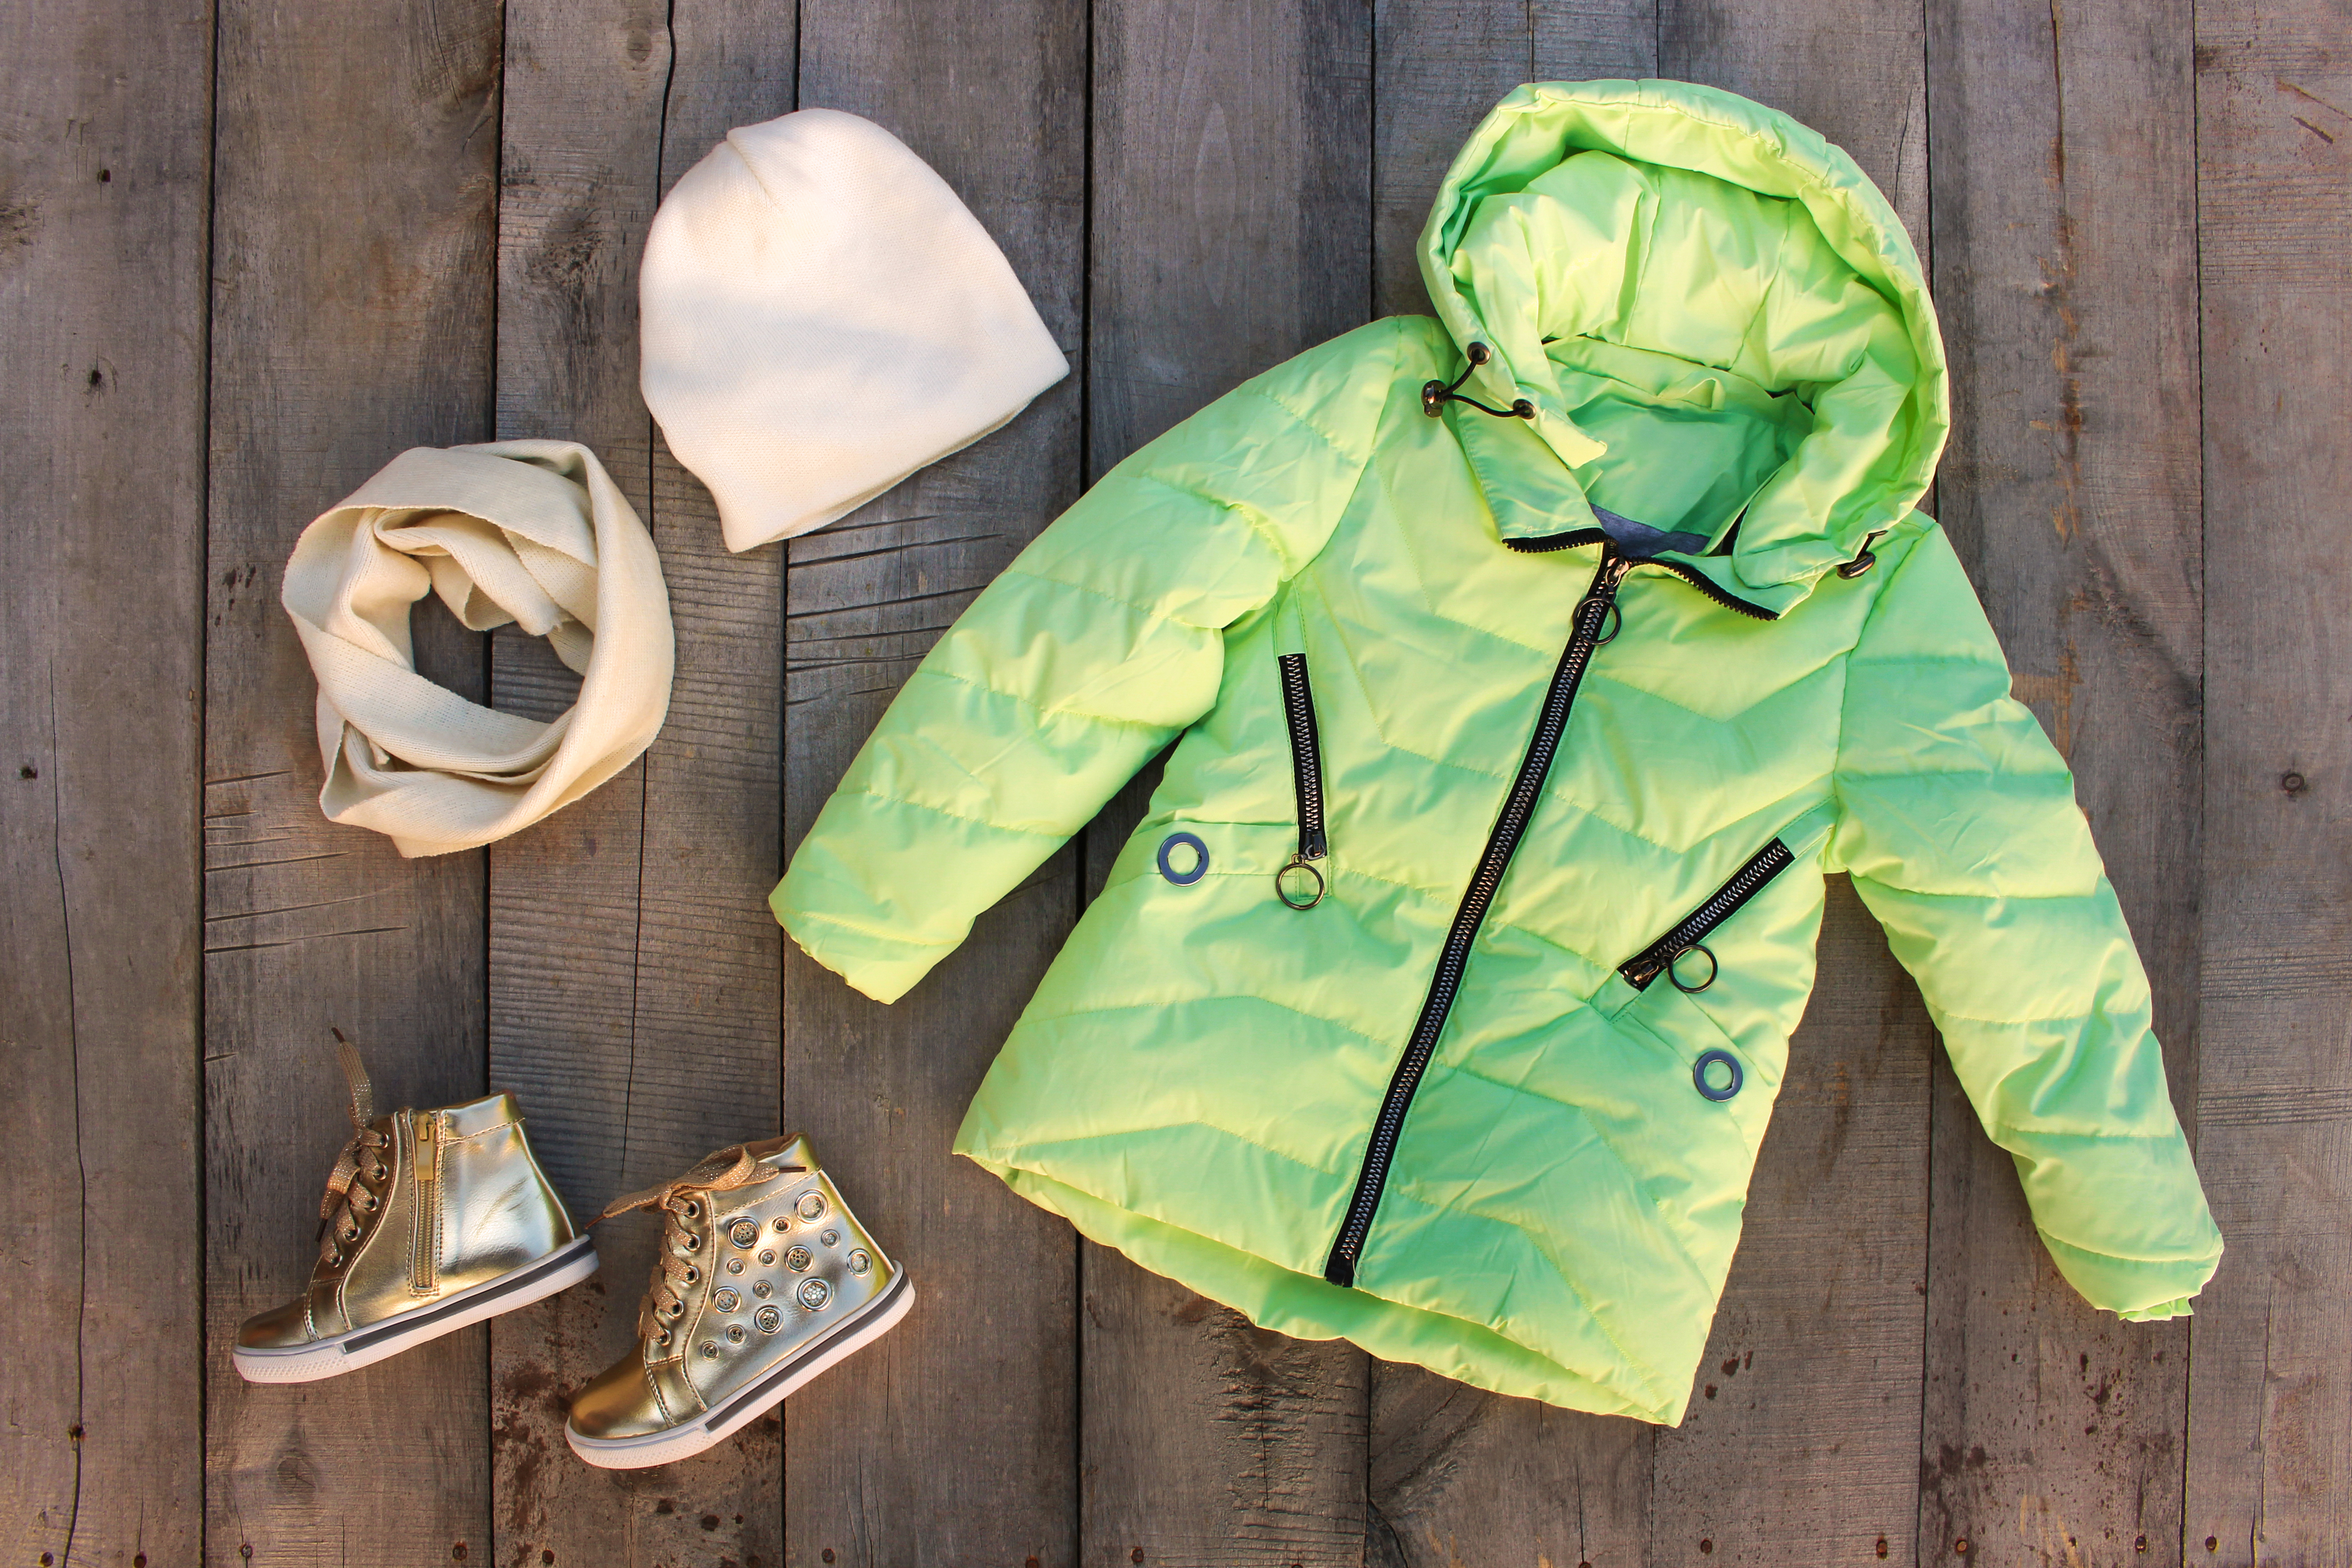 A child's jacket with other accessories | Source: Shutterstock